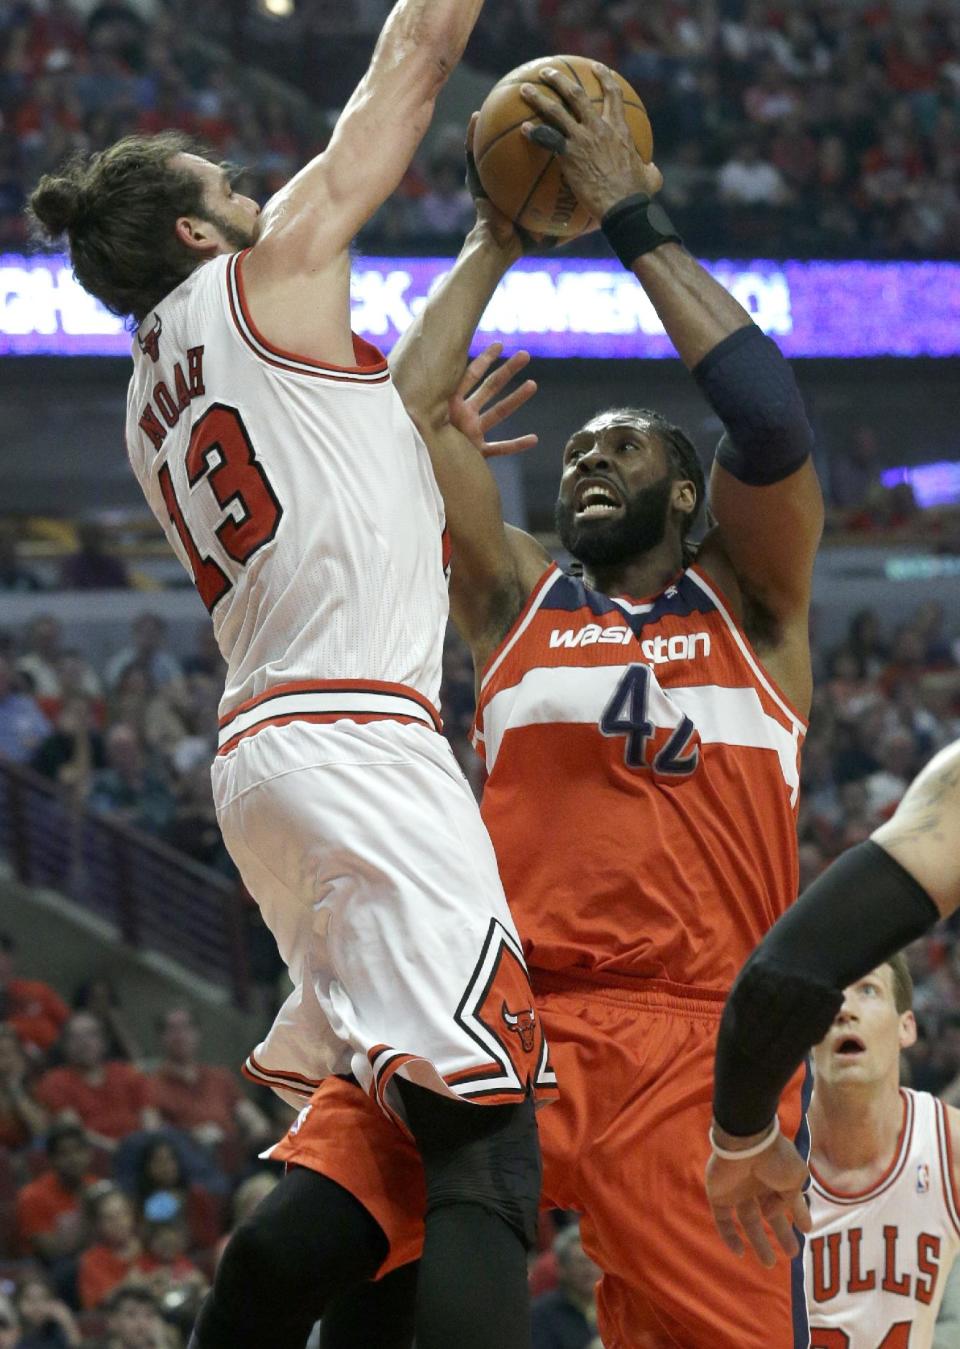 Washington Wizards forward Nene, right, drives to the basket against Chicago Bulls center Joakim Noah during the first half in Game 1 of an opening-round NBA basketball playoff series in Chicago, Sunday, April 20, 2014. (AP Photo/Nam Y. Huh)